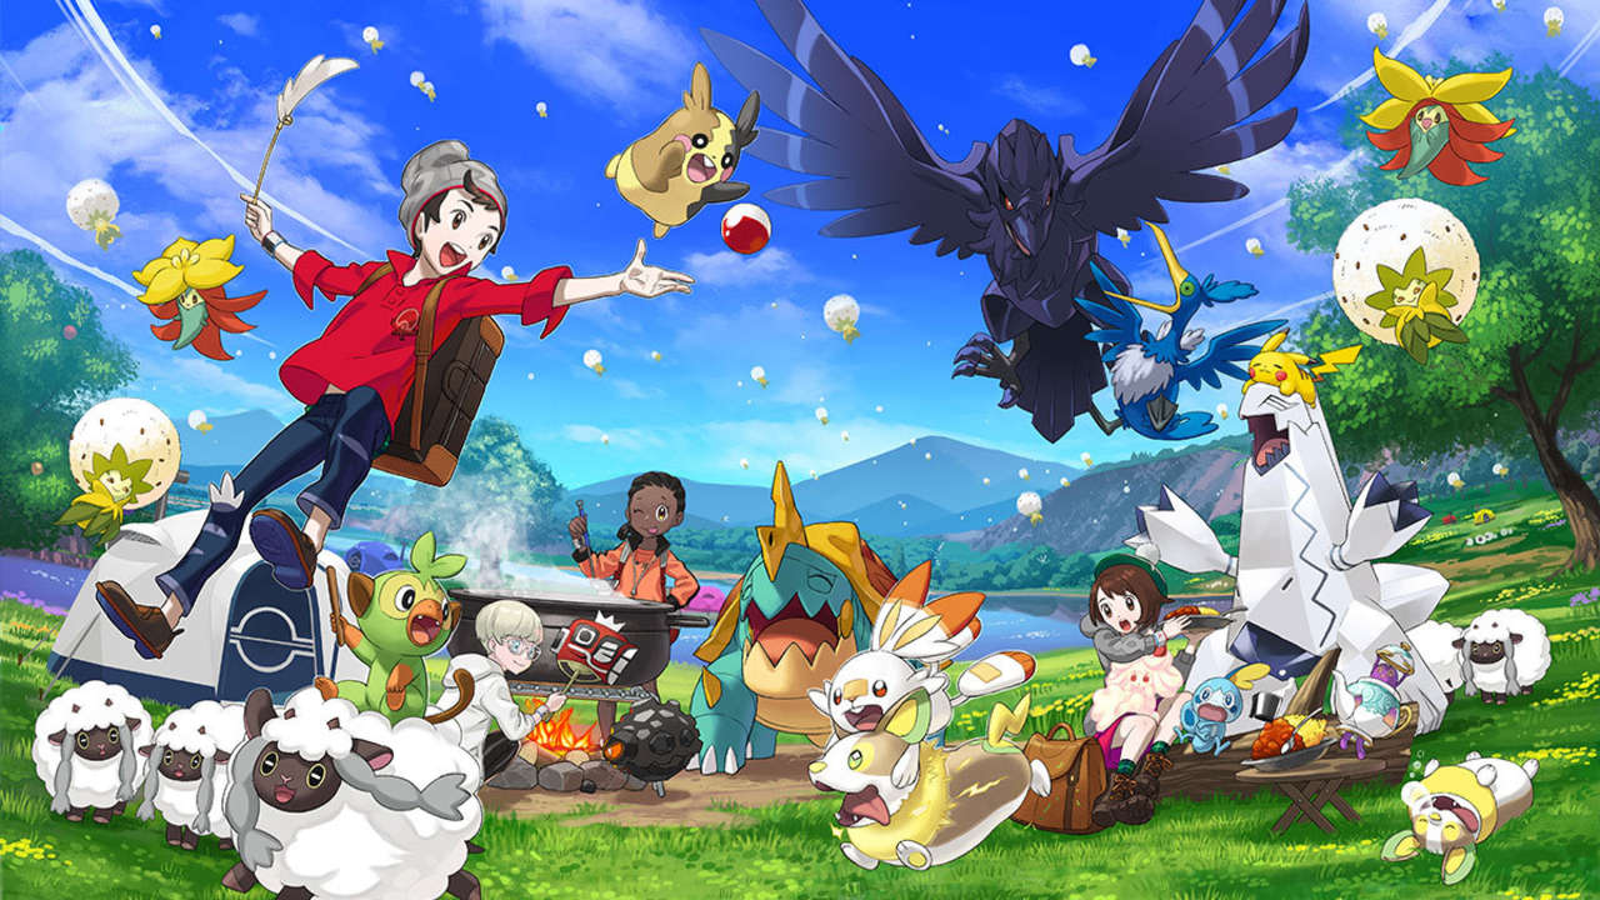 Your favourite Pokémon is probably not in Pokémon Sword and Shield